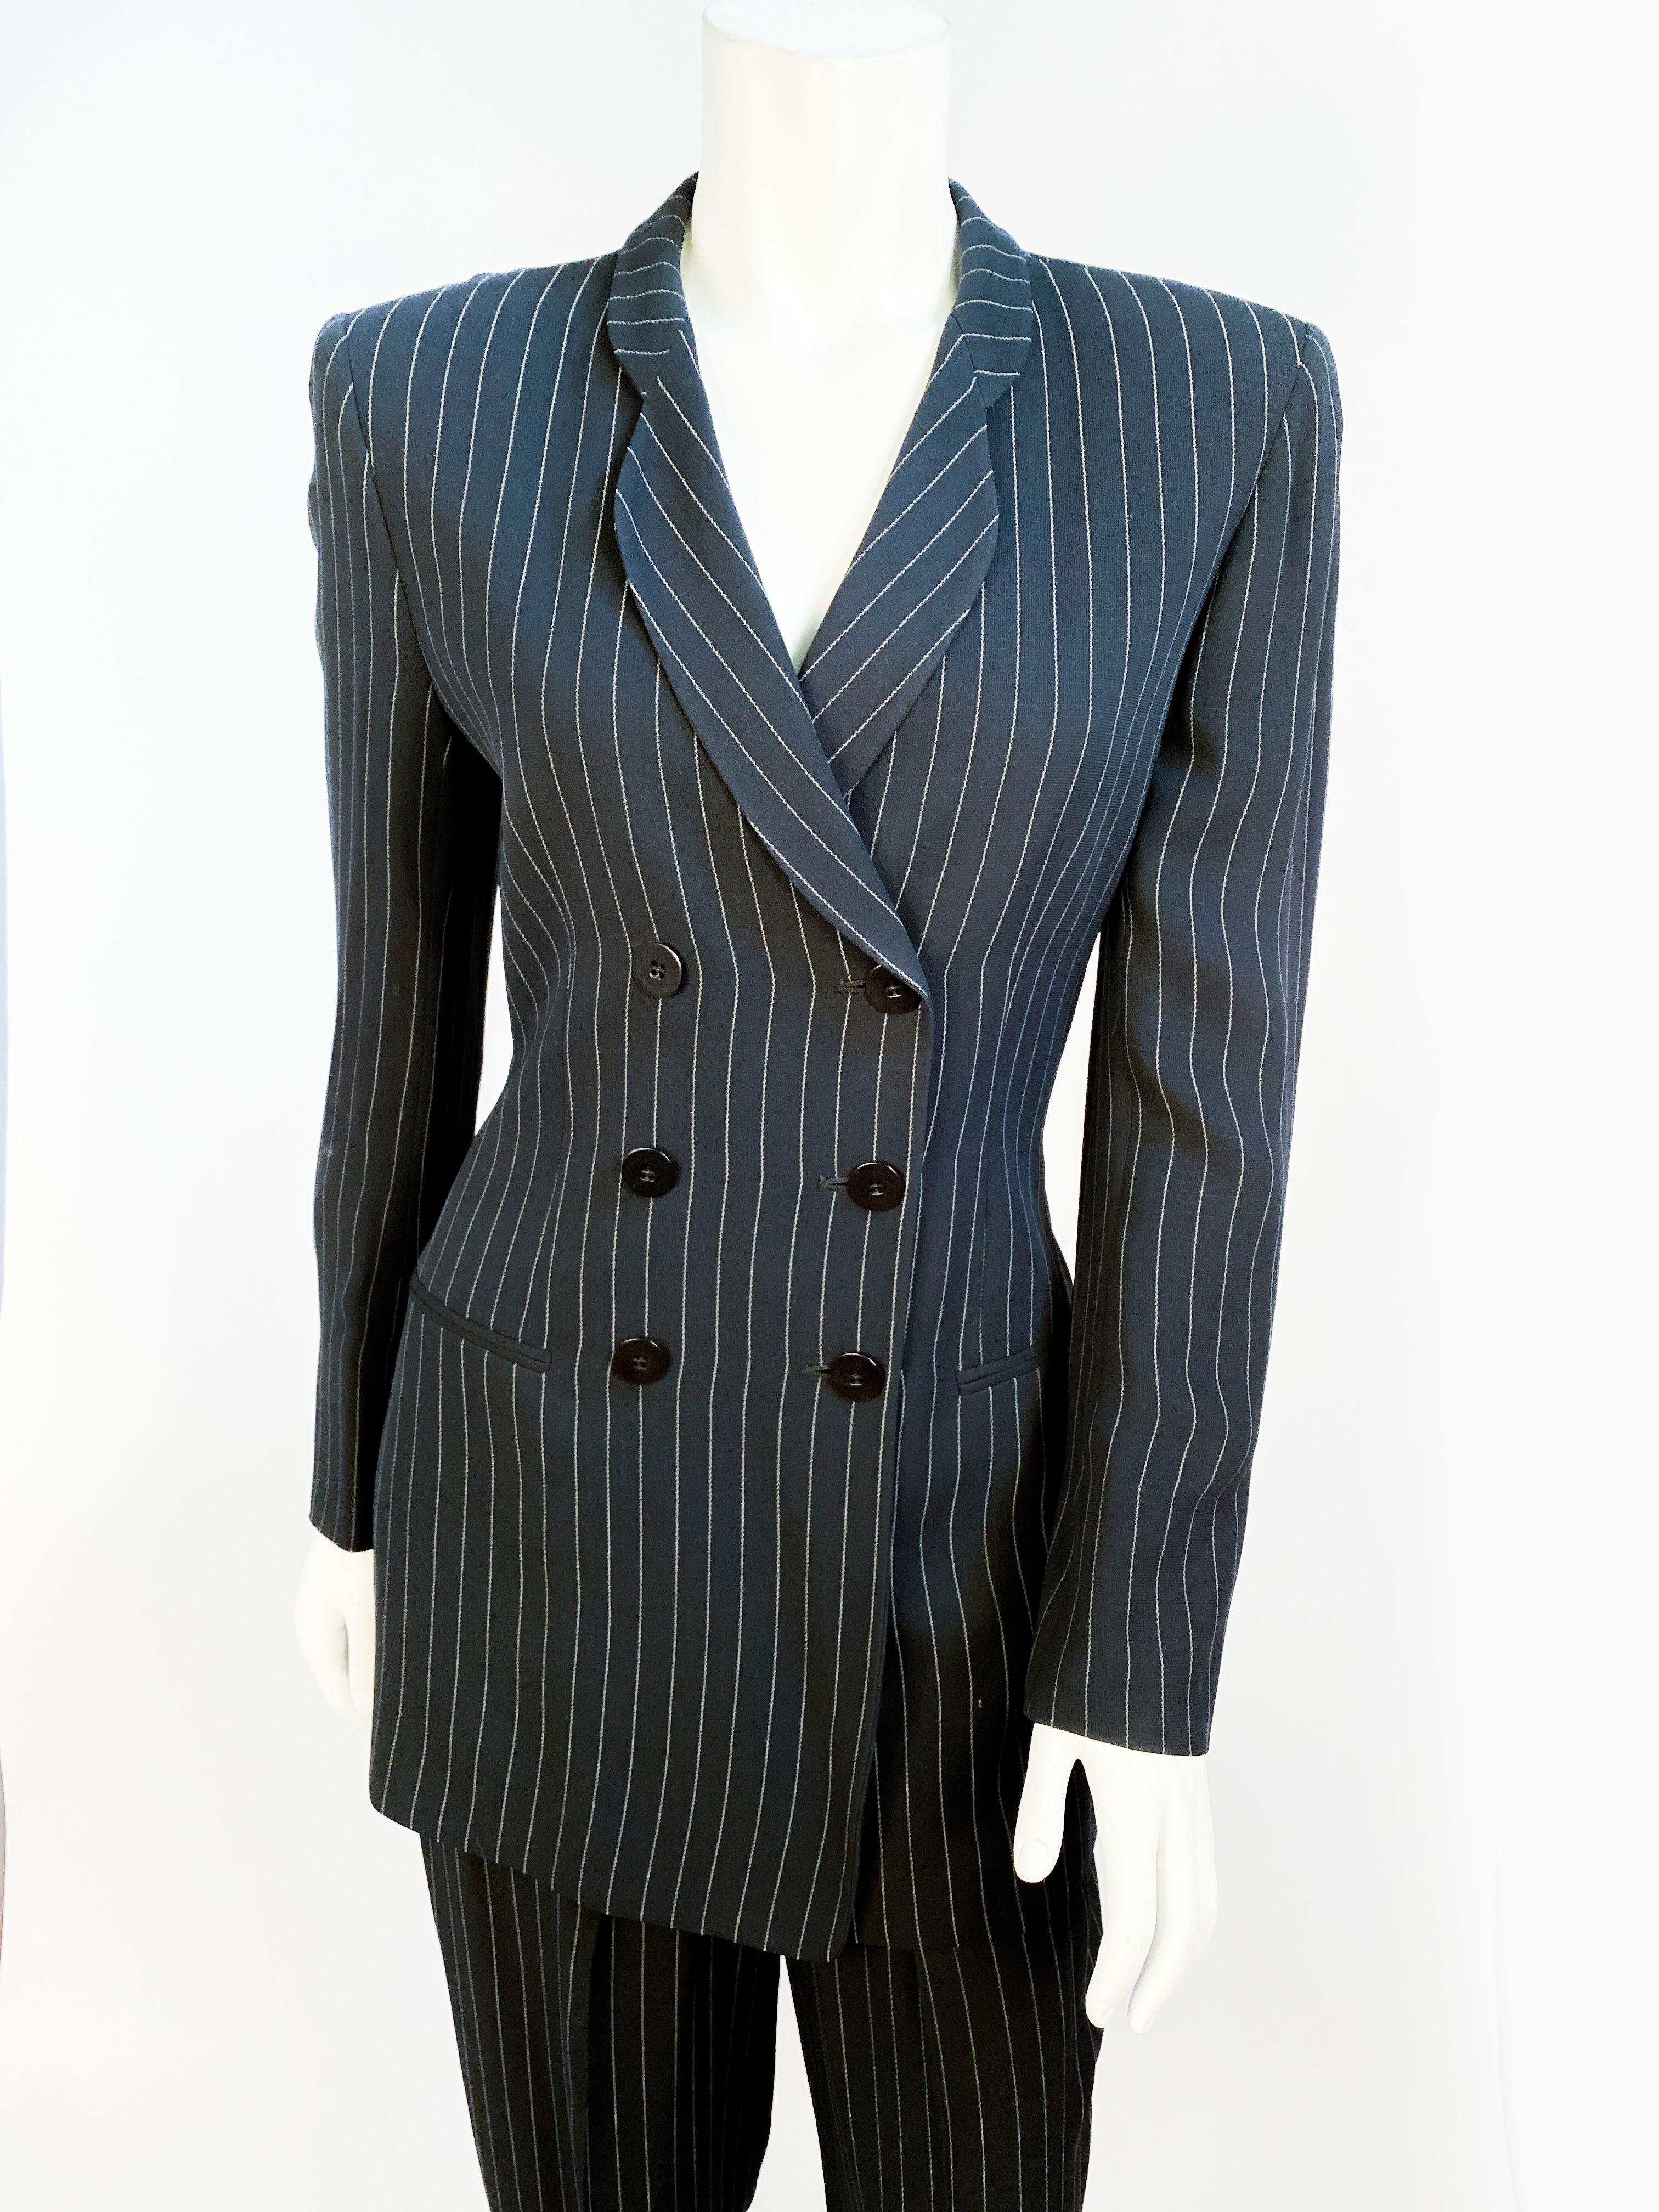 1990s Giorgio Armani Le Collezioni womens pinstripe double-brested suit in navy rayon. Matching pant are high-waisted and fitted. 